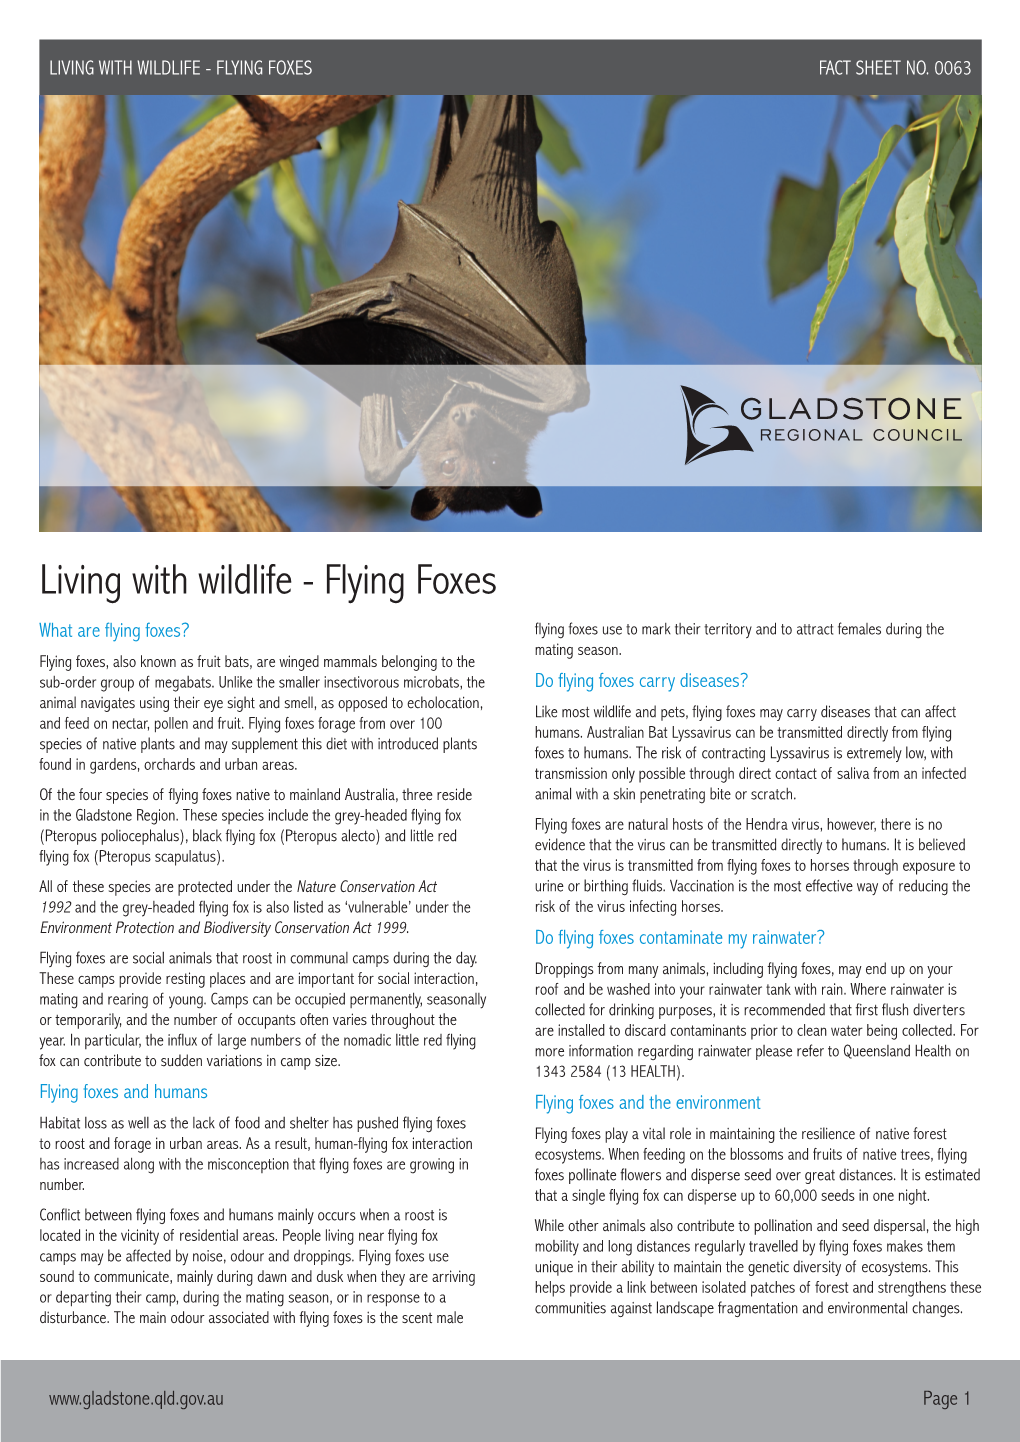 Living with Wildlife - Flying Foxes Fact Sheet No